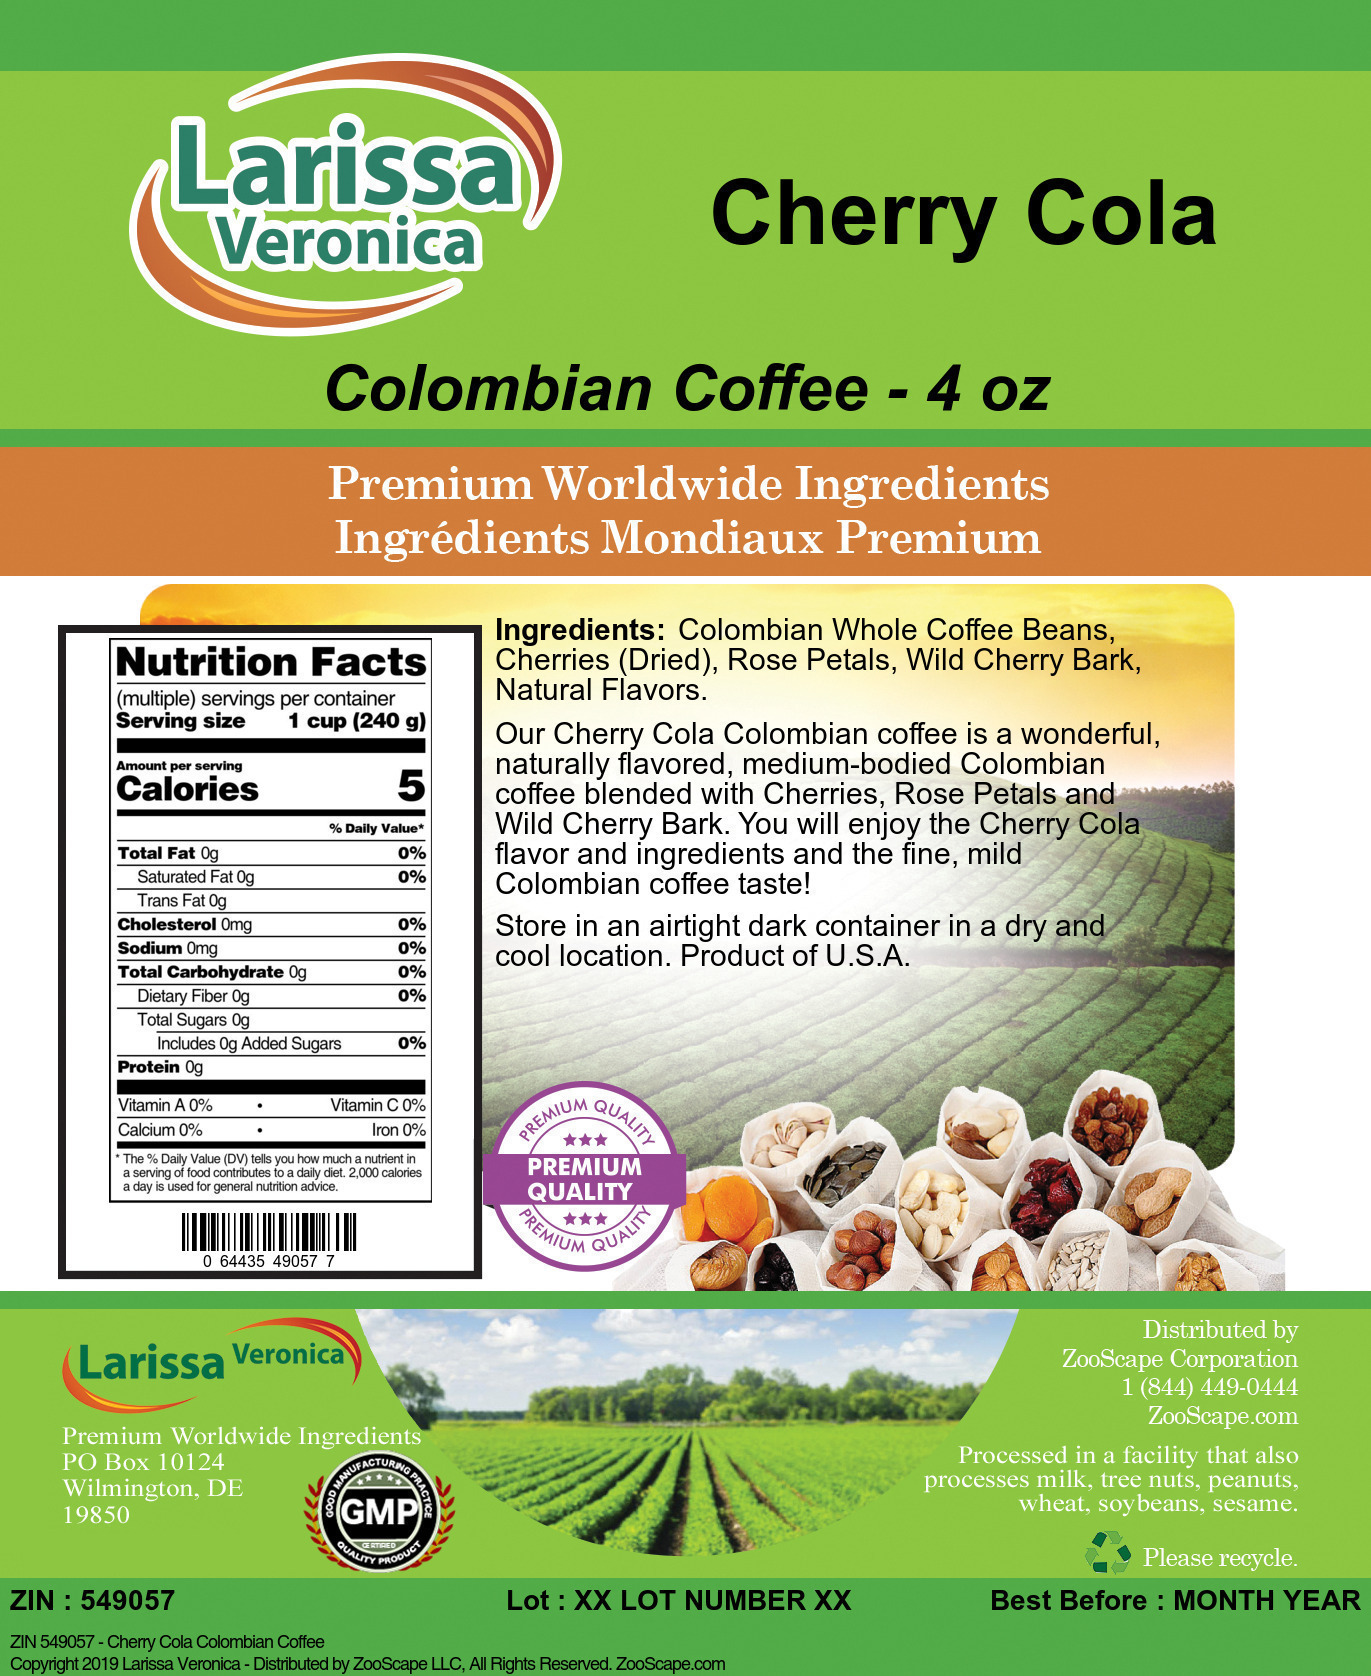 Cherry Cola Colombian Coffee - Label